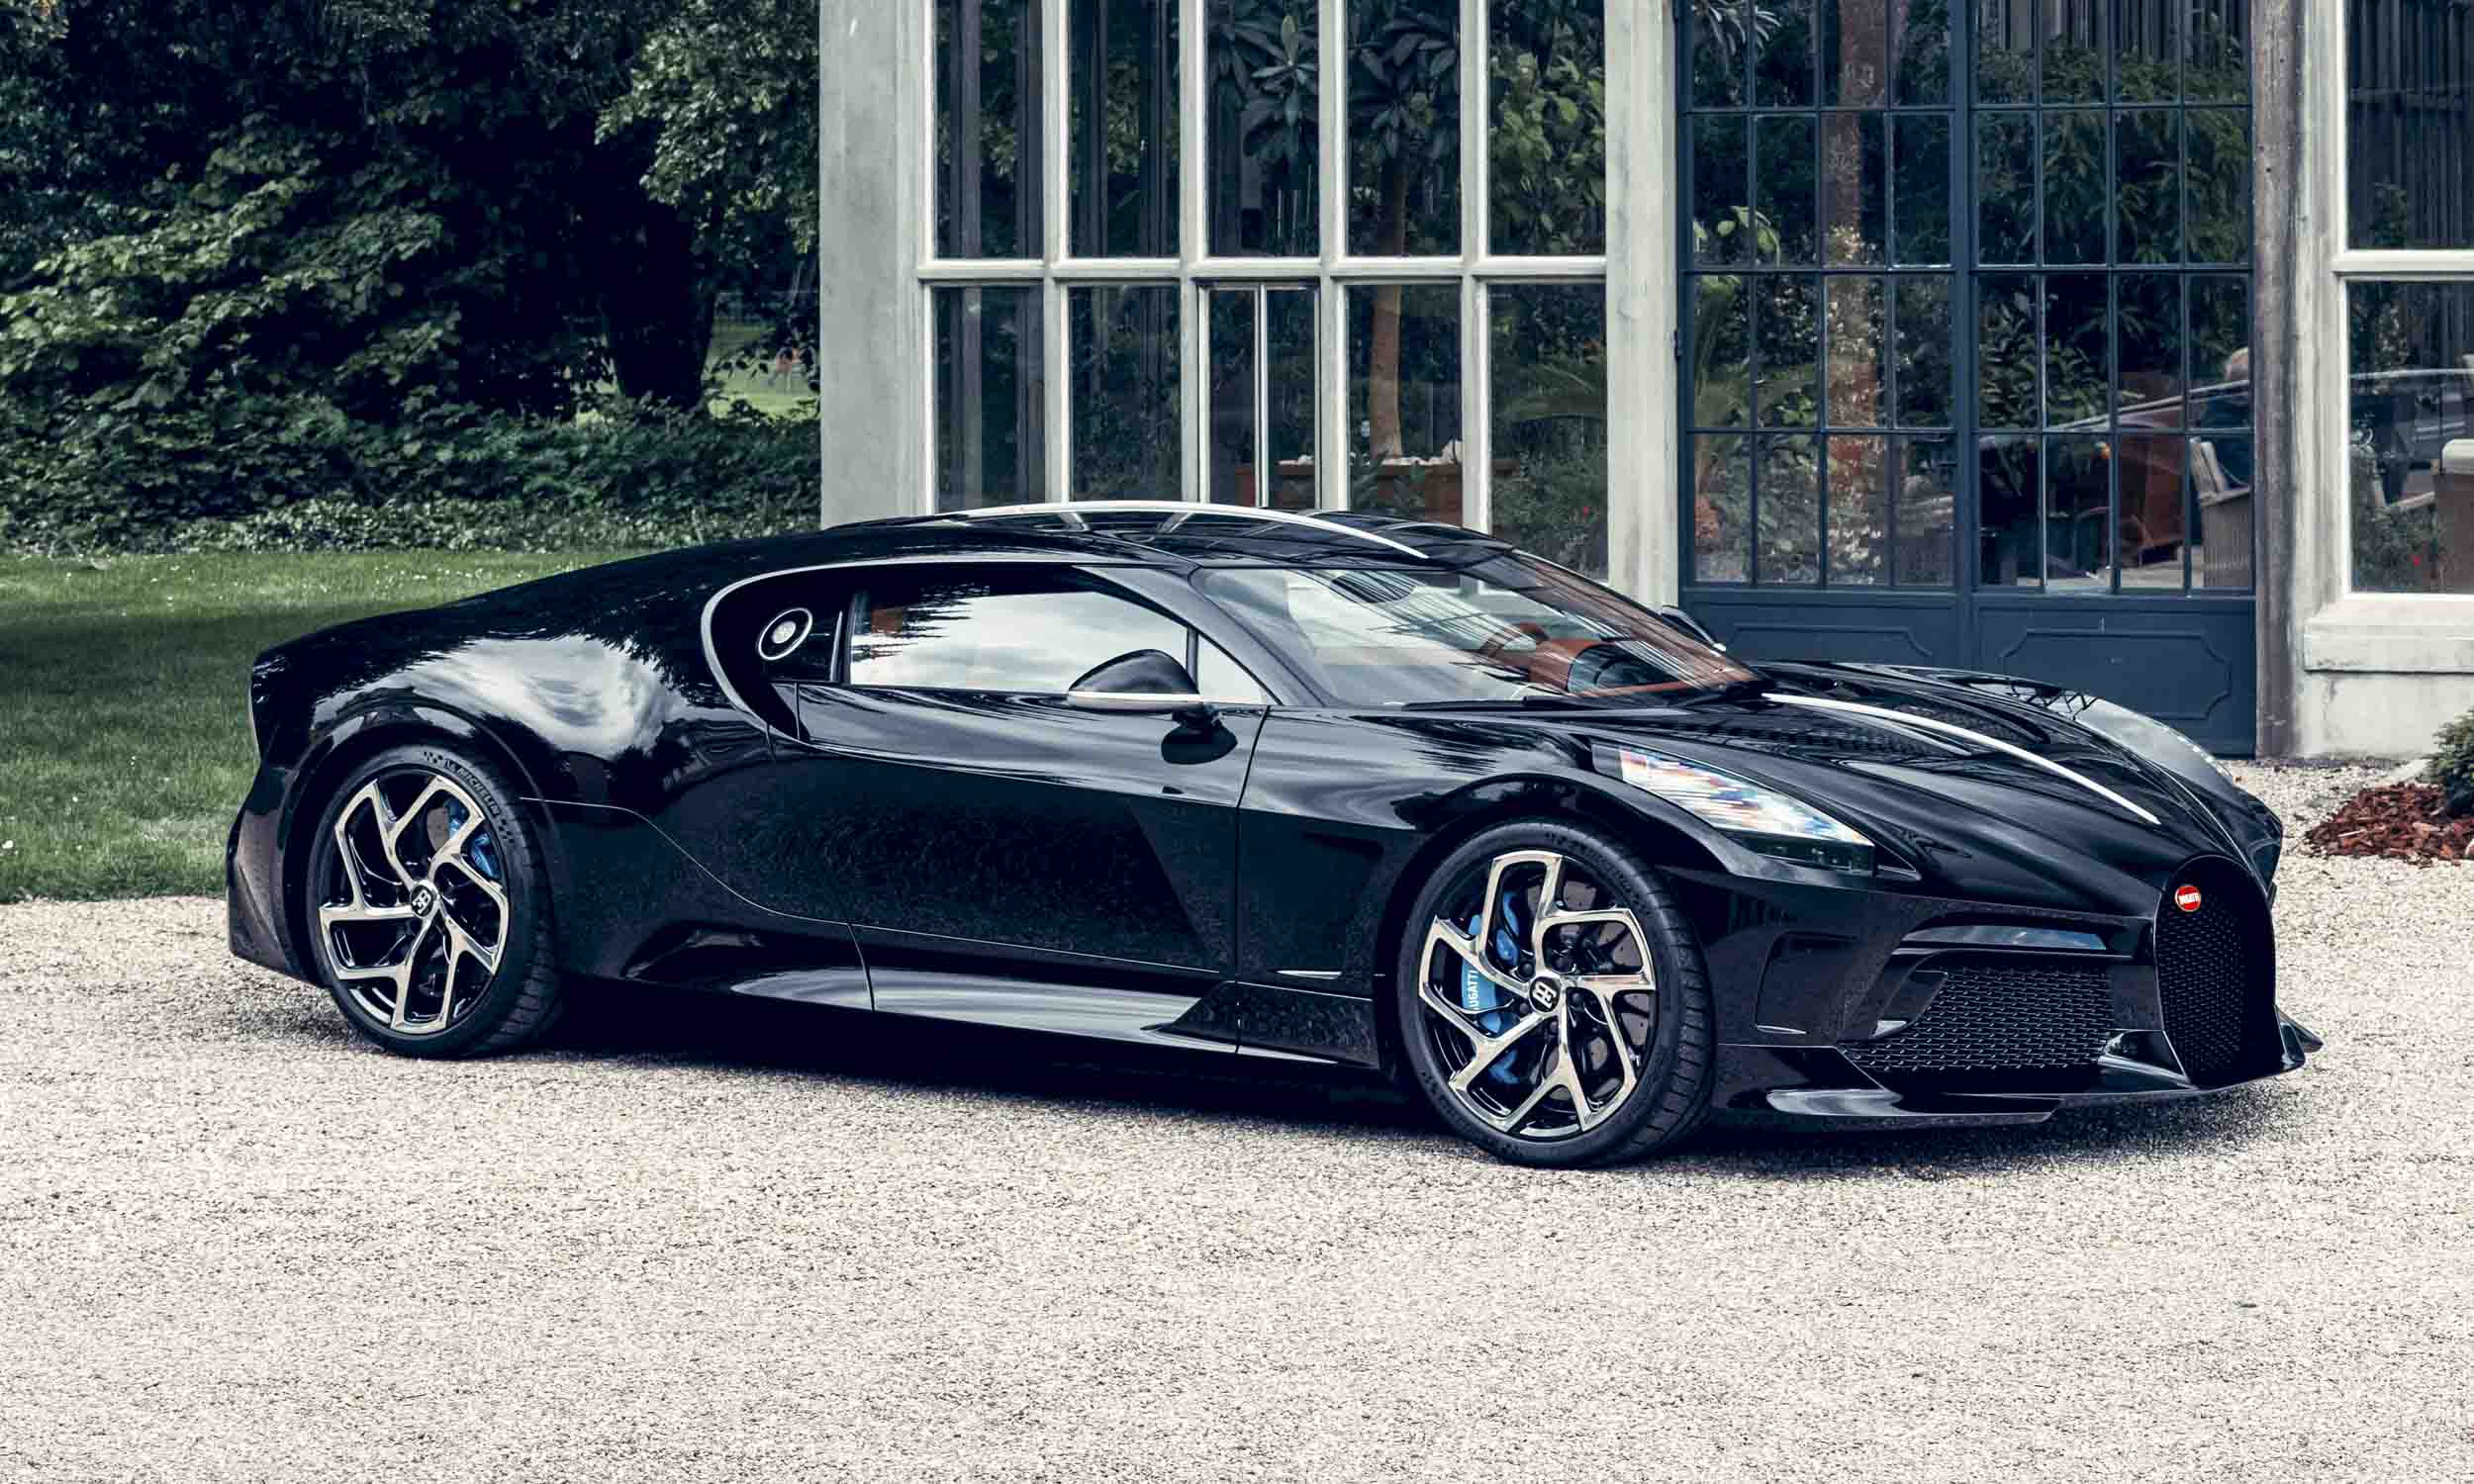 <p>          Total Production: 1 Vehicle<br> Price: €11 million (US$13.4 million)<br> The first look at this handcrafted, one-off piece of mobile art came at its debut on the opening day of the 2019 Geneva Motor Show press preview. La Voiture Noire is a stunning, sleek, grand touring coupe with sculpted bodywork in black carbon fiber produced for a single Bugatti customer. This modern sports car pays tribute to the brand-defining Bugatti Type 57 SC Atlantic.         </p>